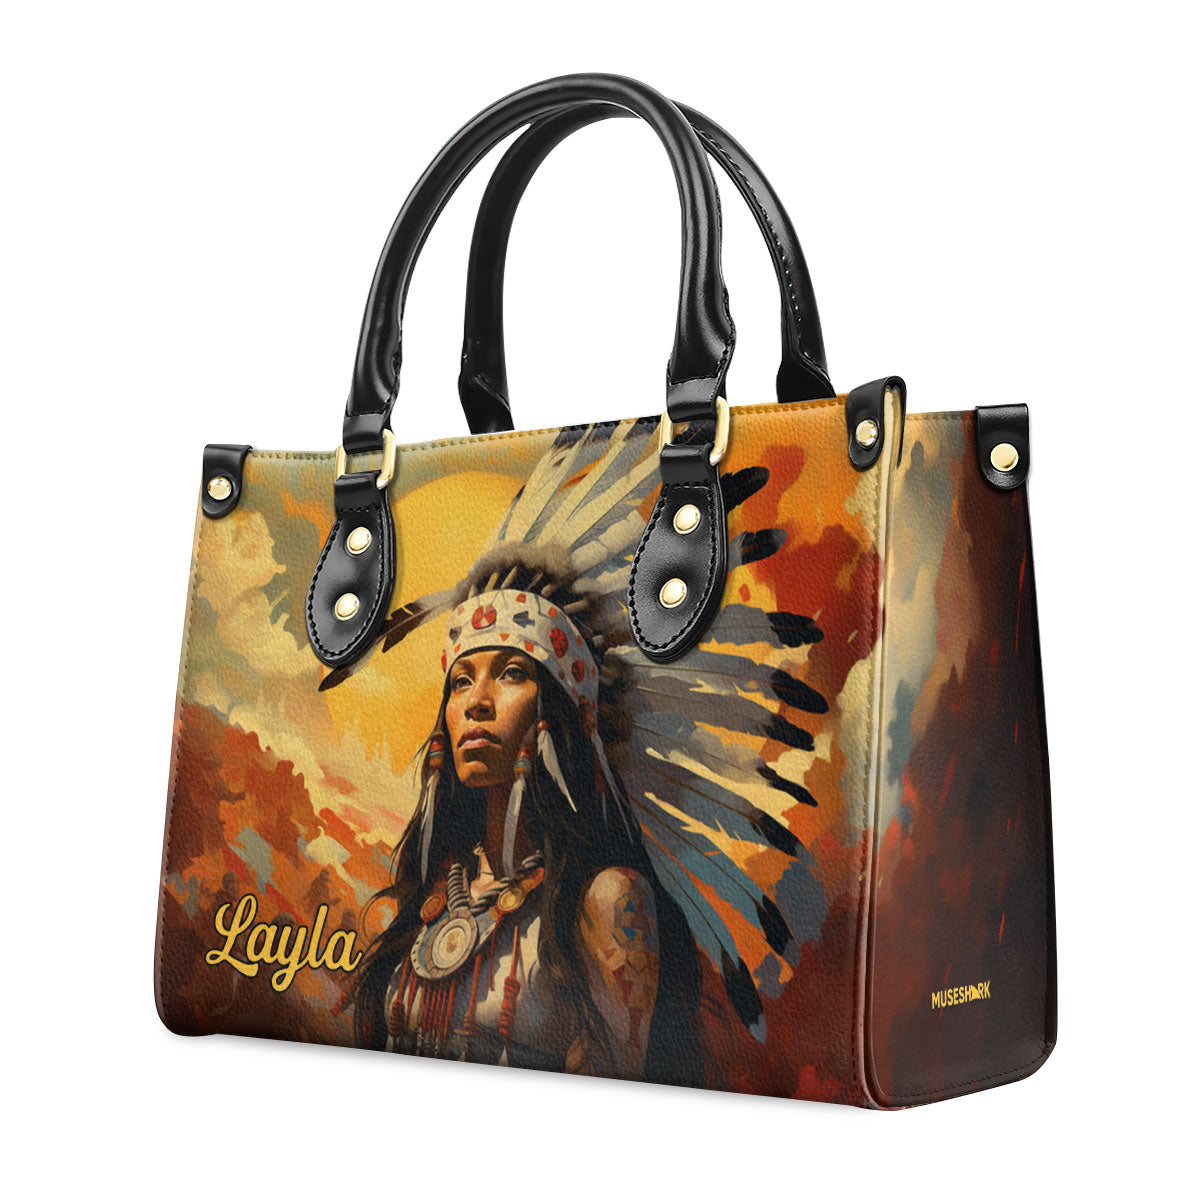 Native American Culture - Personalized Leather Handbag MS115